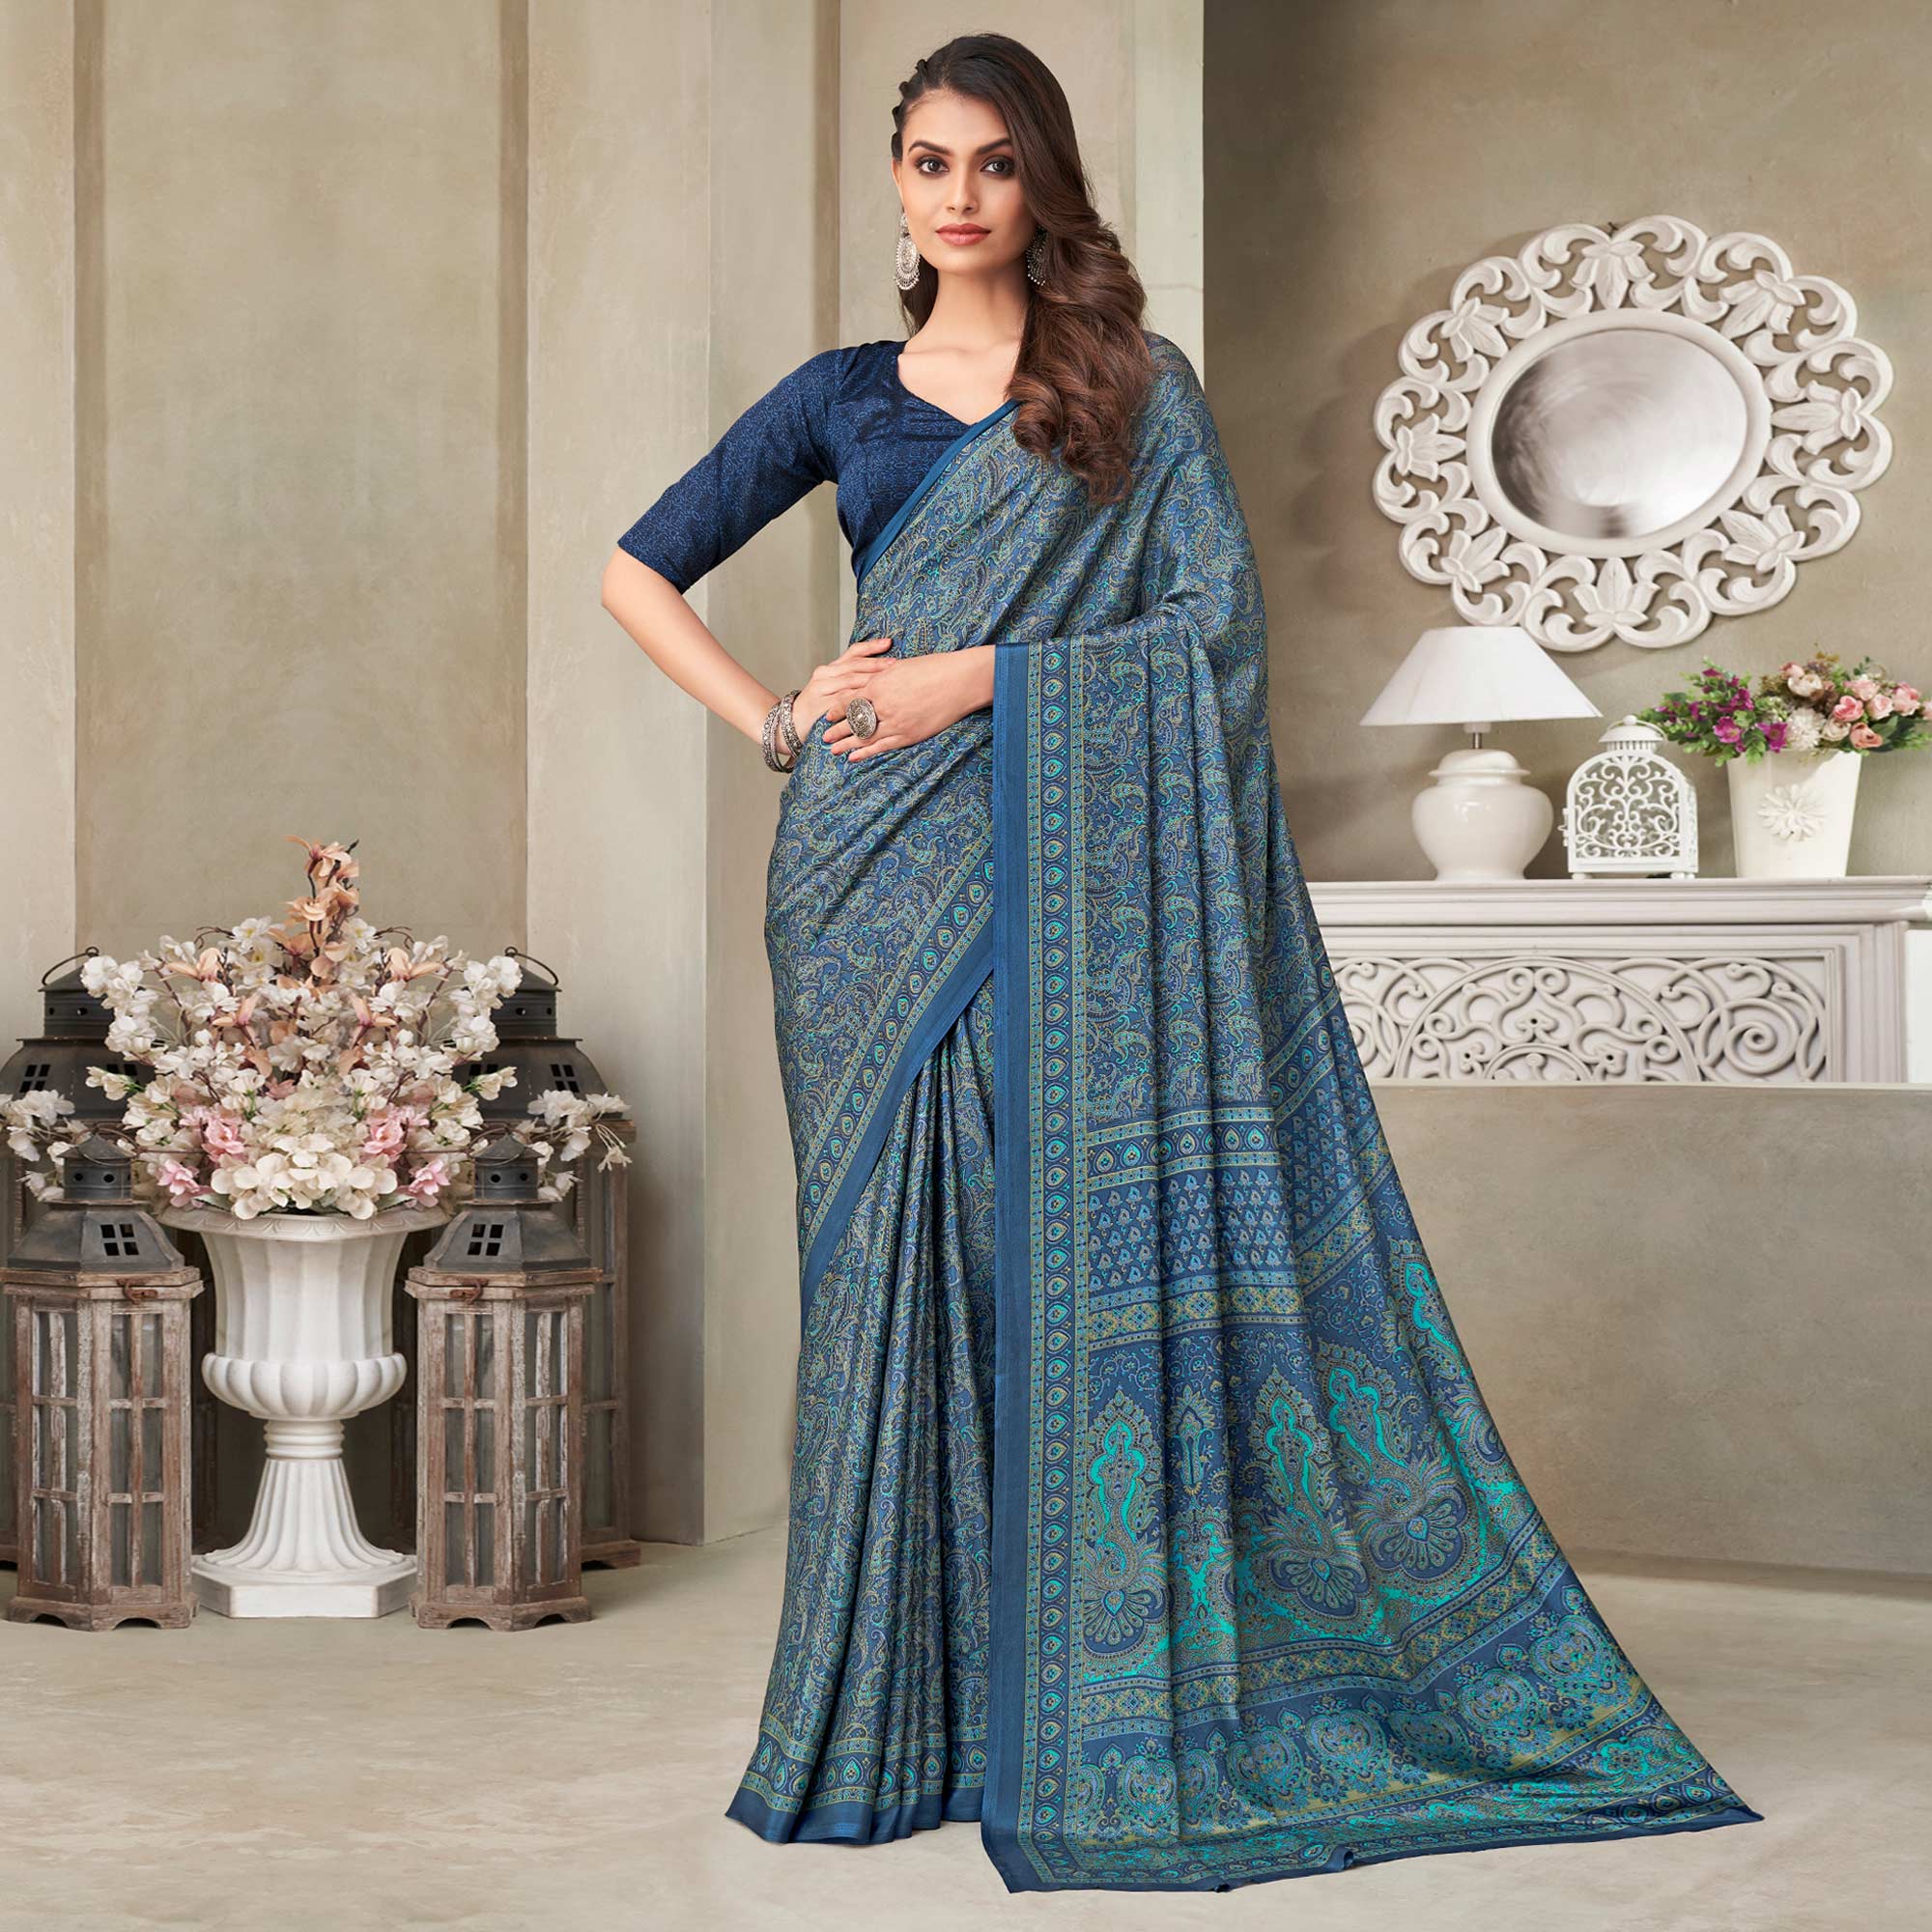 Buy Blue Polycrepe Printed Floral Round Saree Dress With Belt For